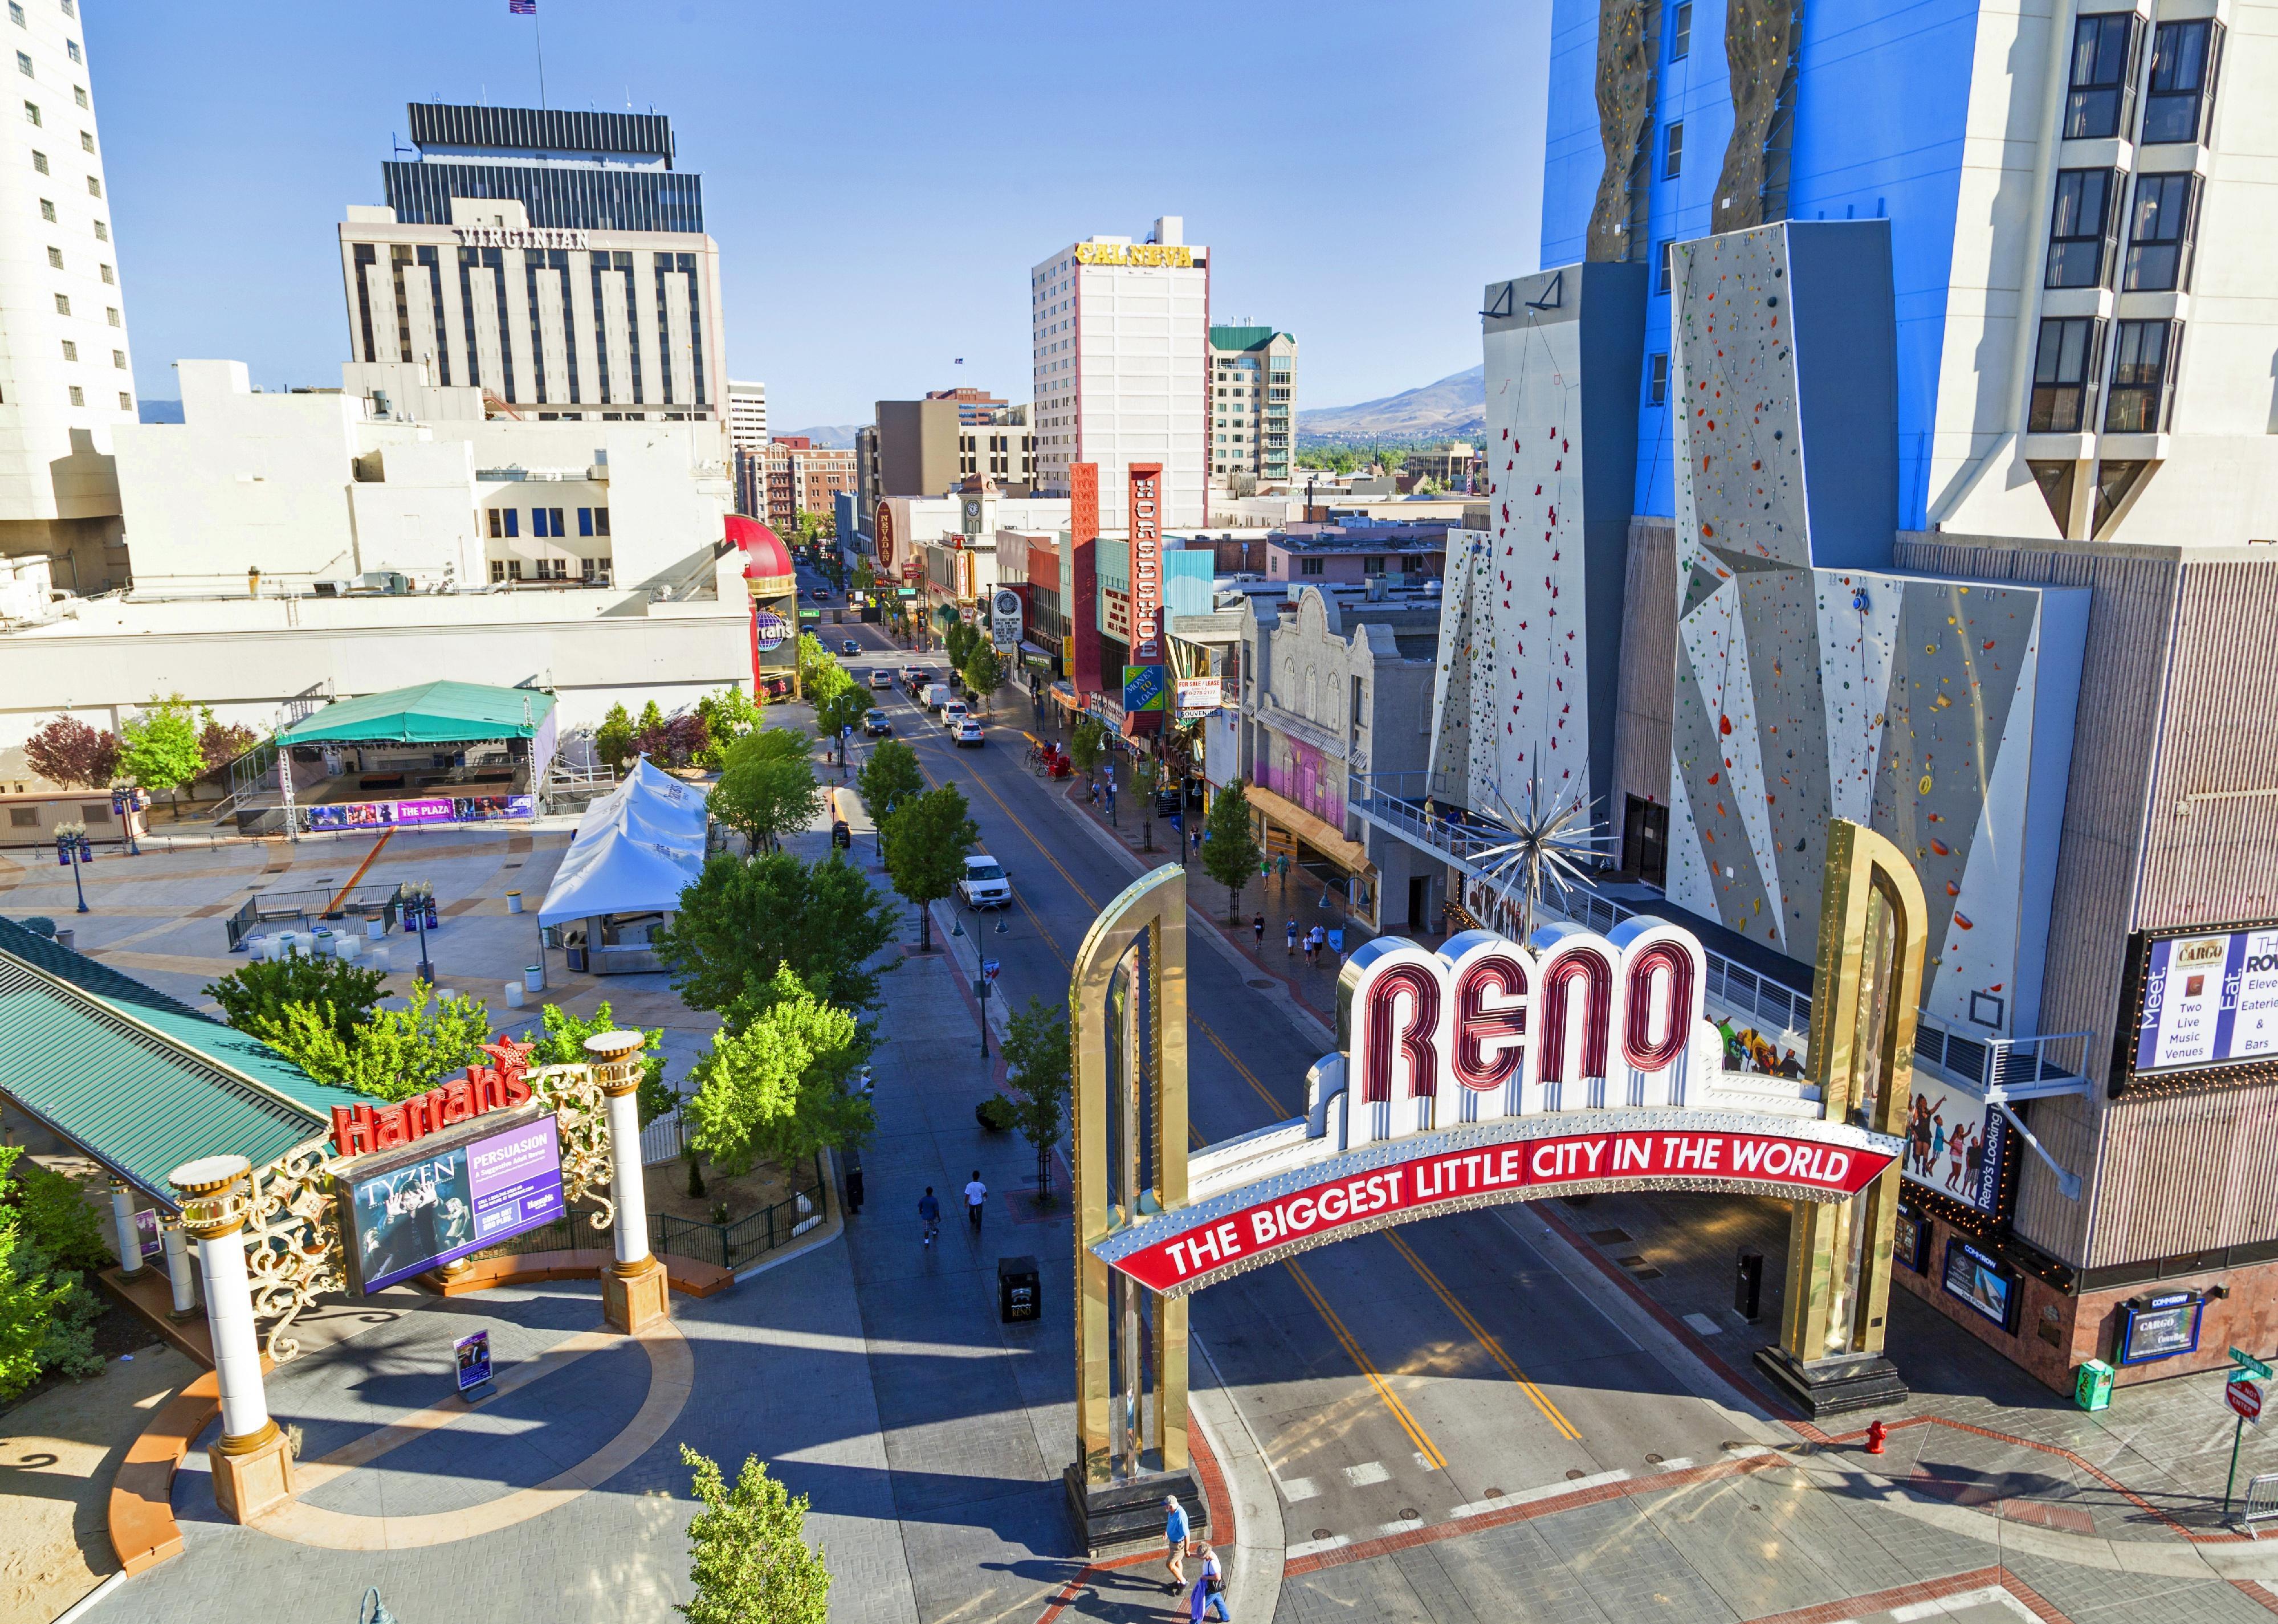 Reno's famous 'The Biggest Little City in the World' sign.